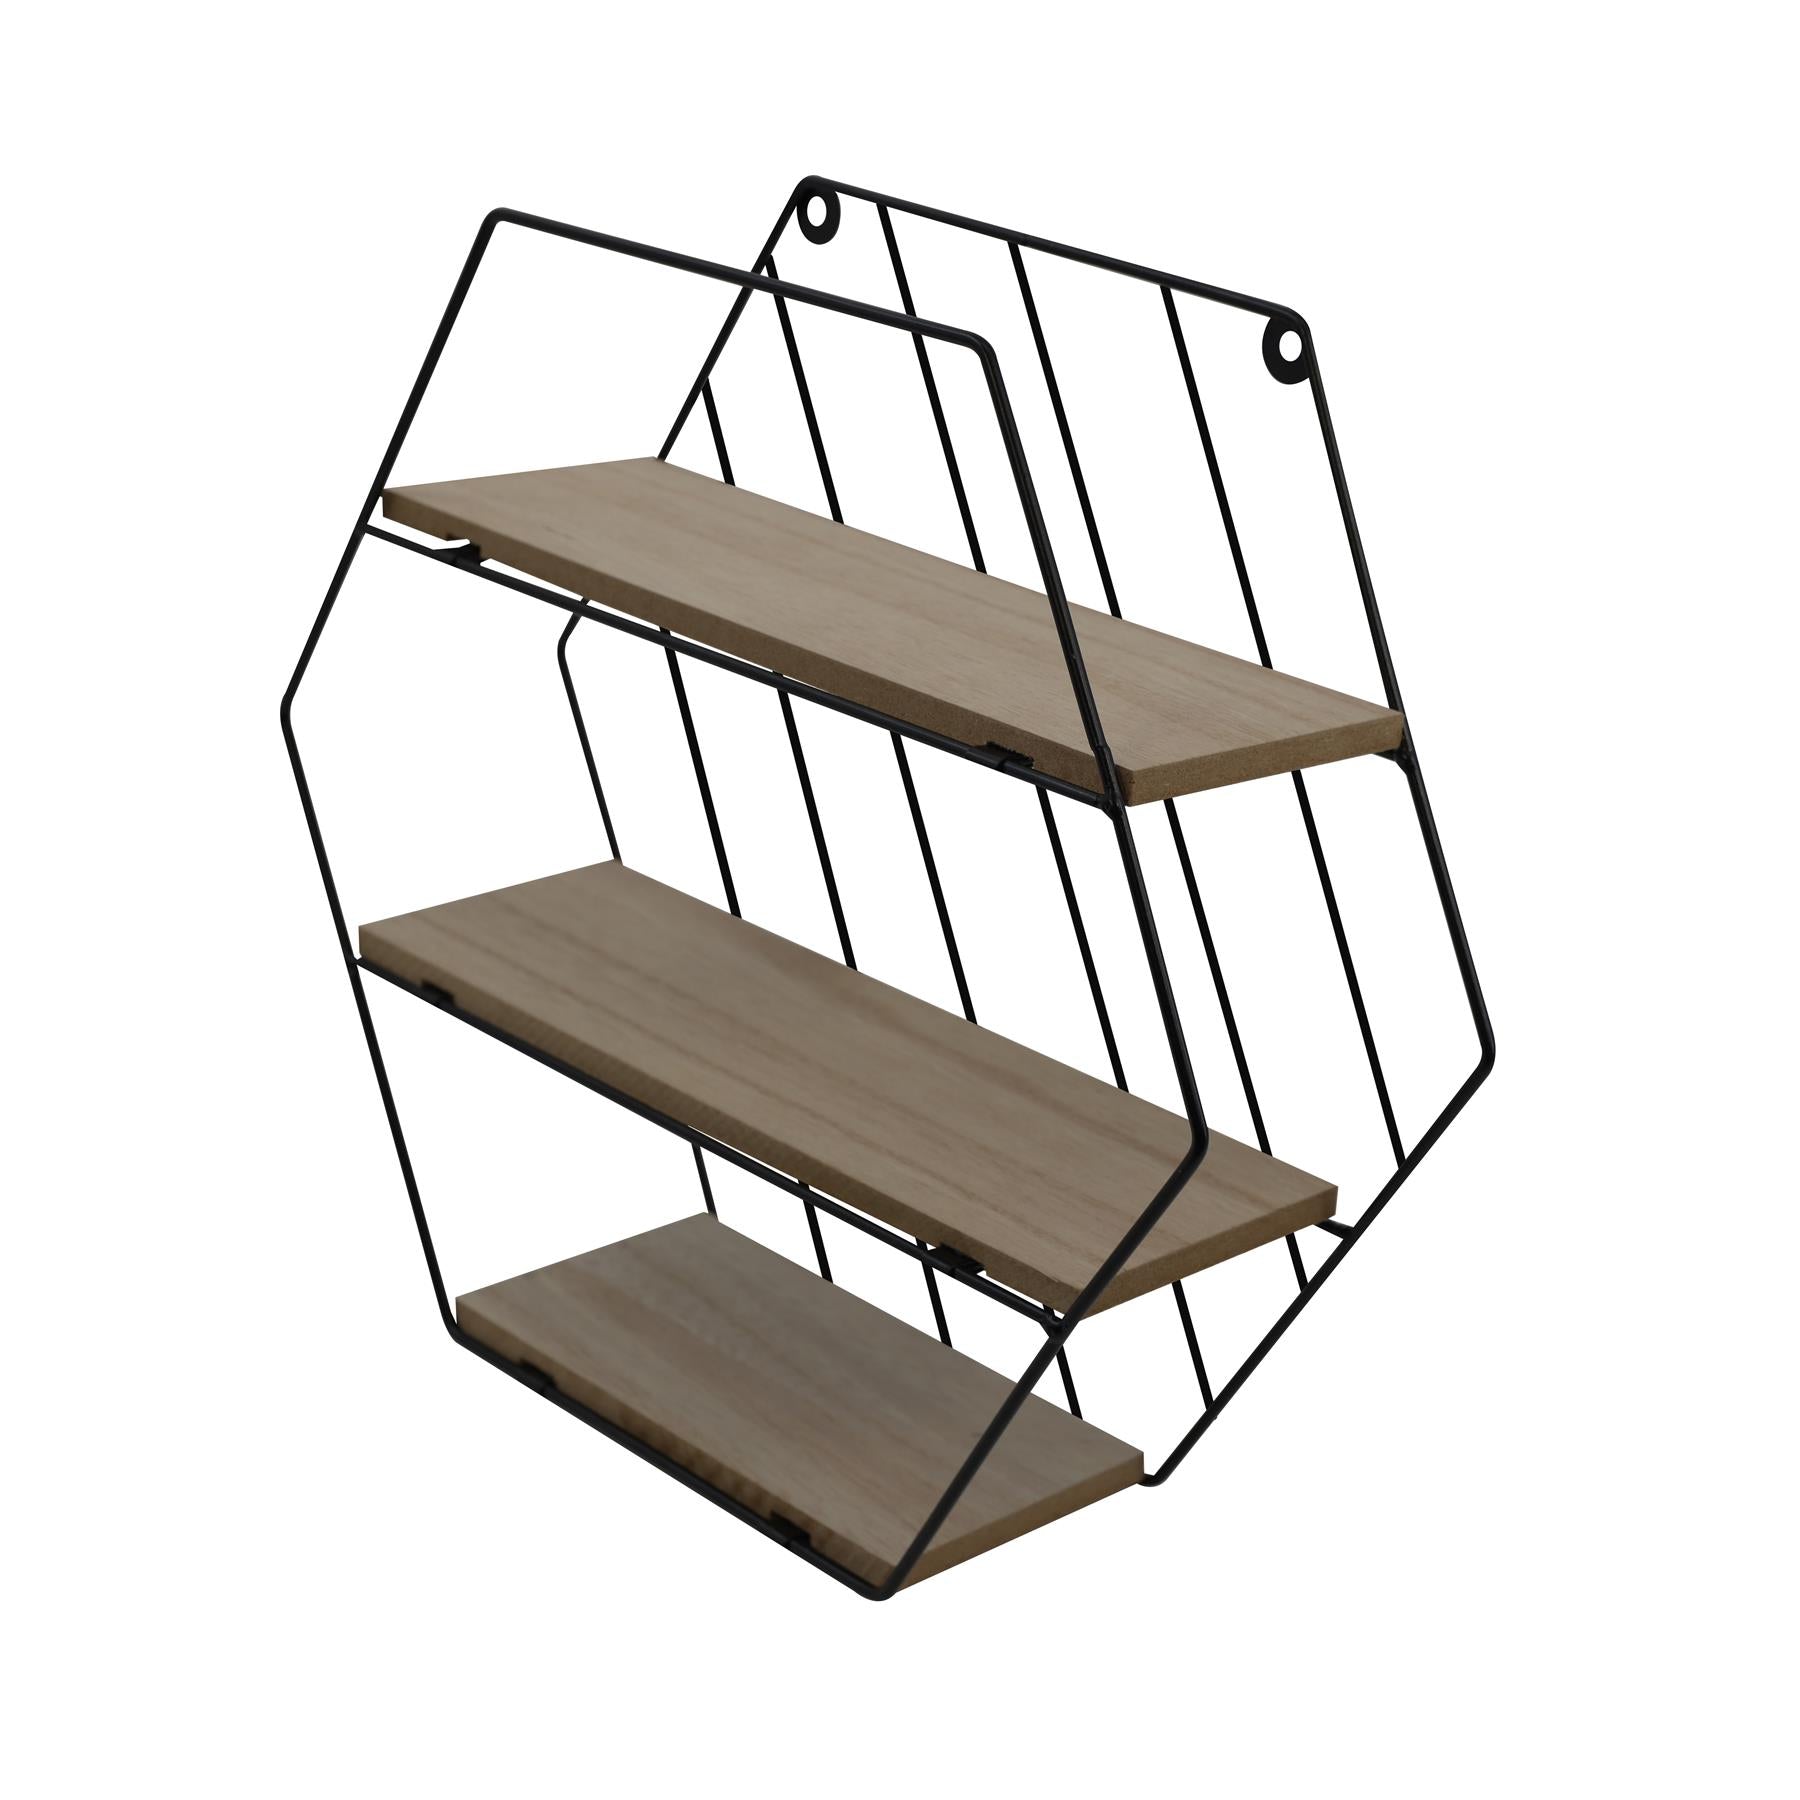 Modern Shelf of Metal Wire and Wood Perfect for Storaging Small Items by Geezy - The Magic Toy Shop